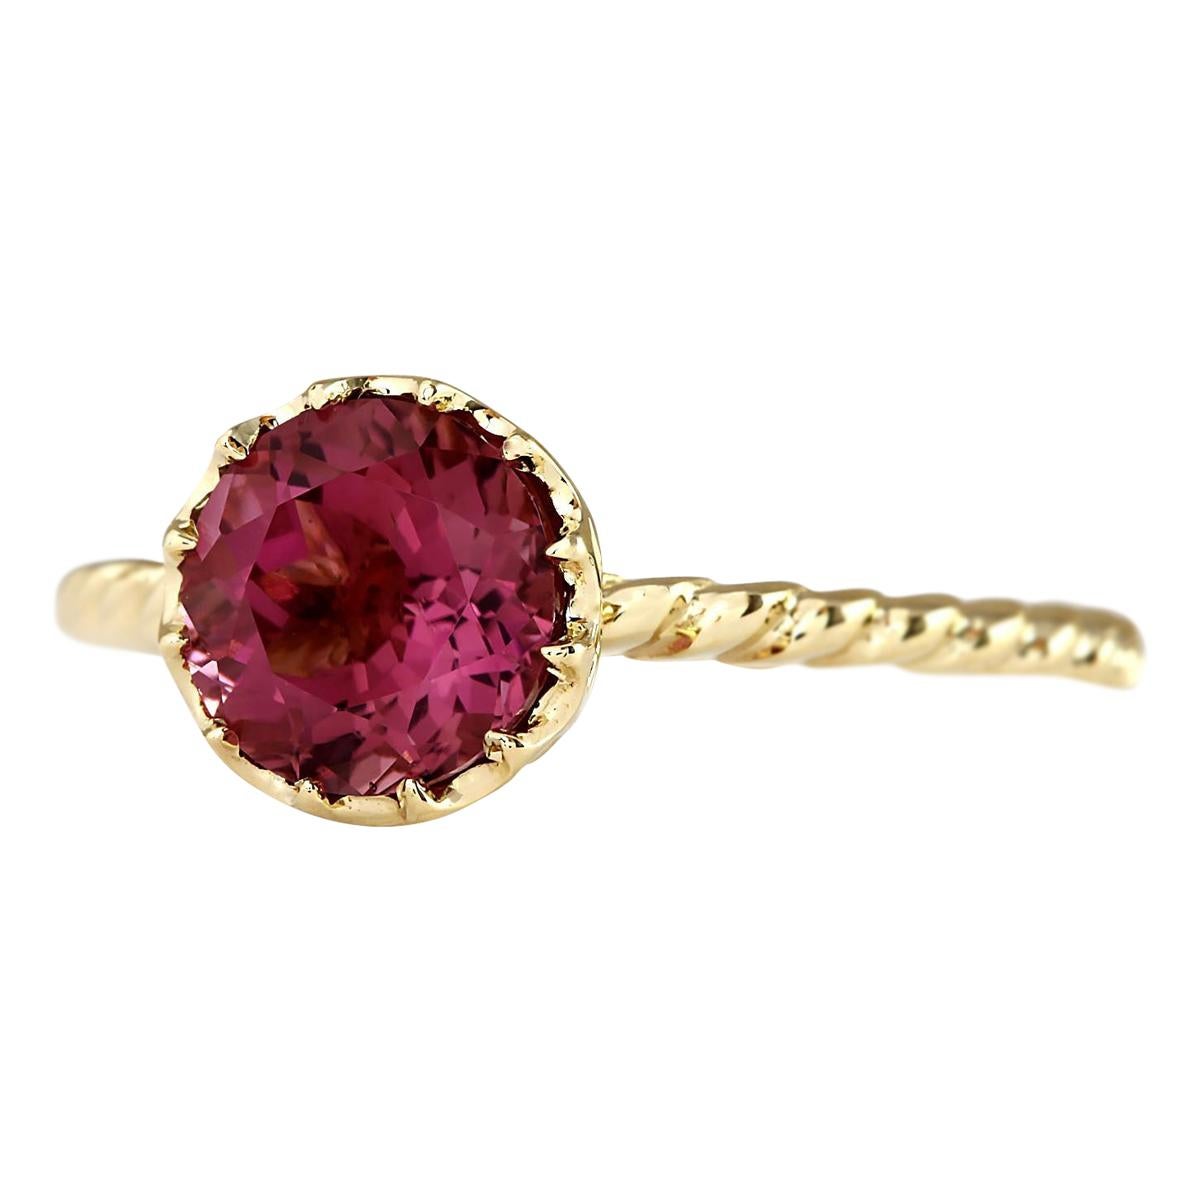 Stamped: 14K Yellow Gold
Total Ring Weight: 1.8 Grams
Total Natural Tourmaline Weight is 1.50 Carat
Color: Pink
Face Measures: 7.00c7.00 mm
Sku: [703265W]